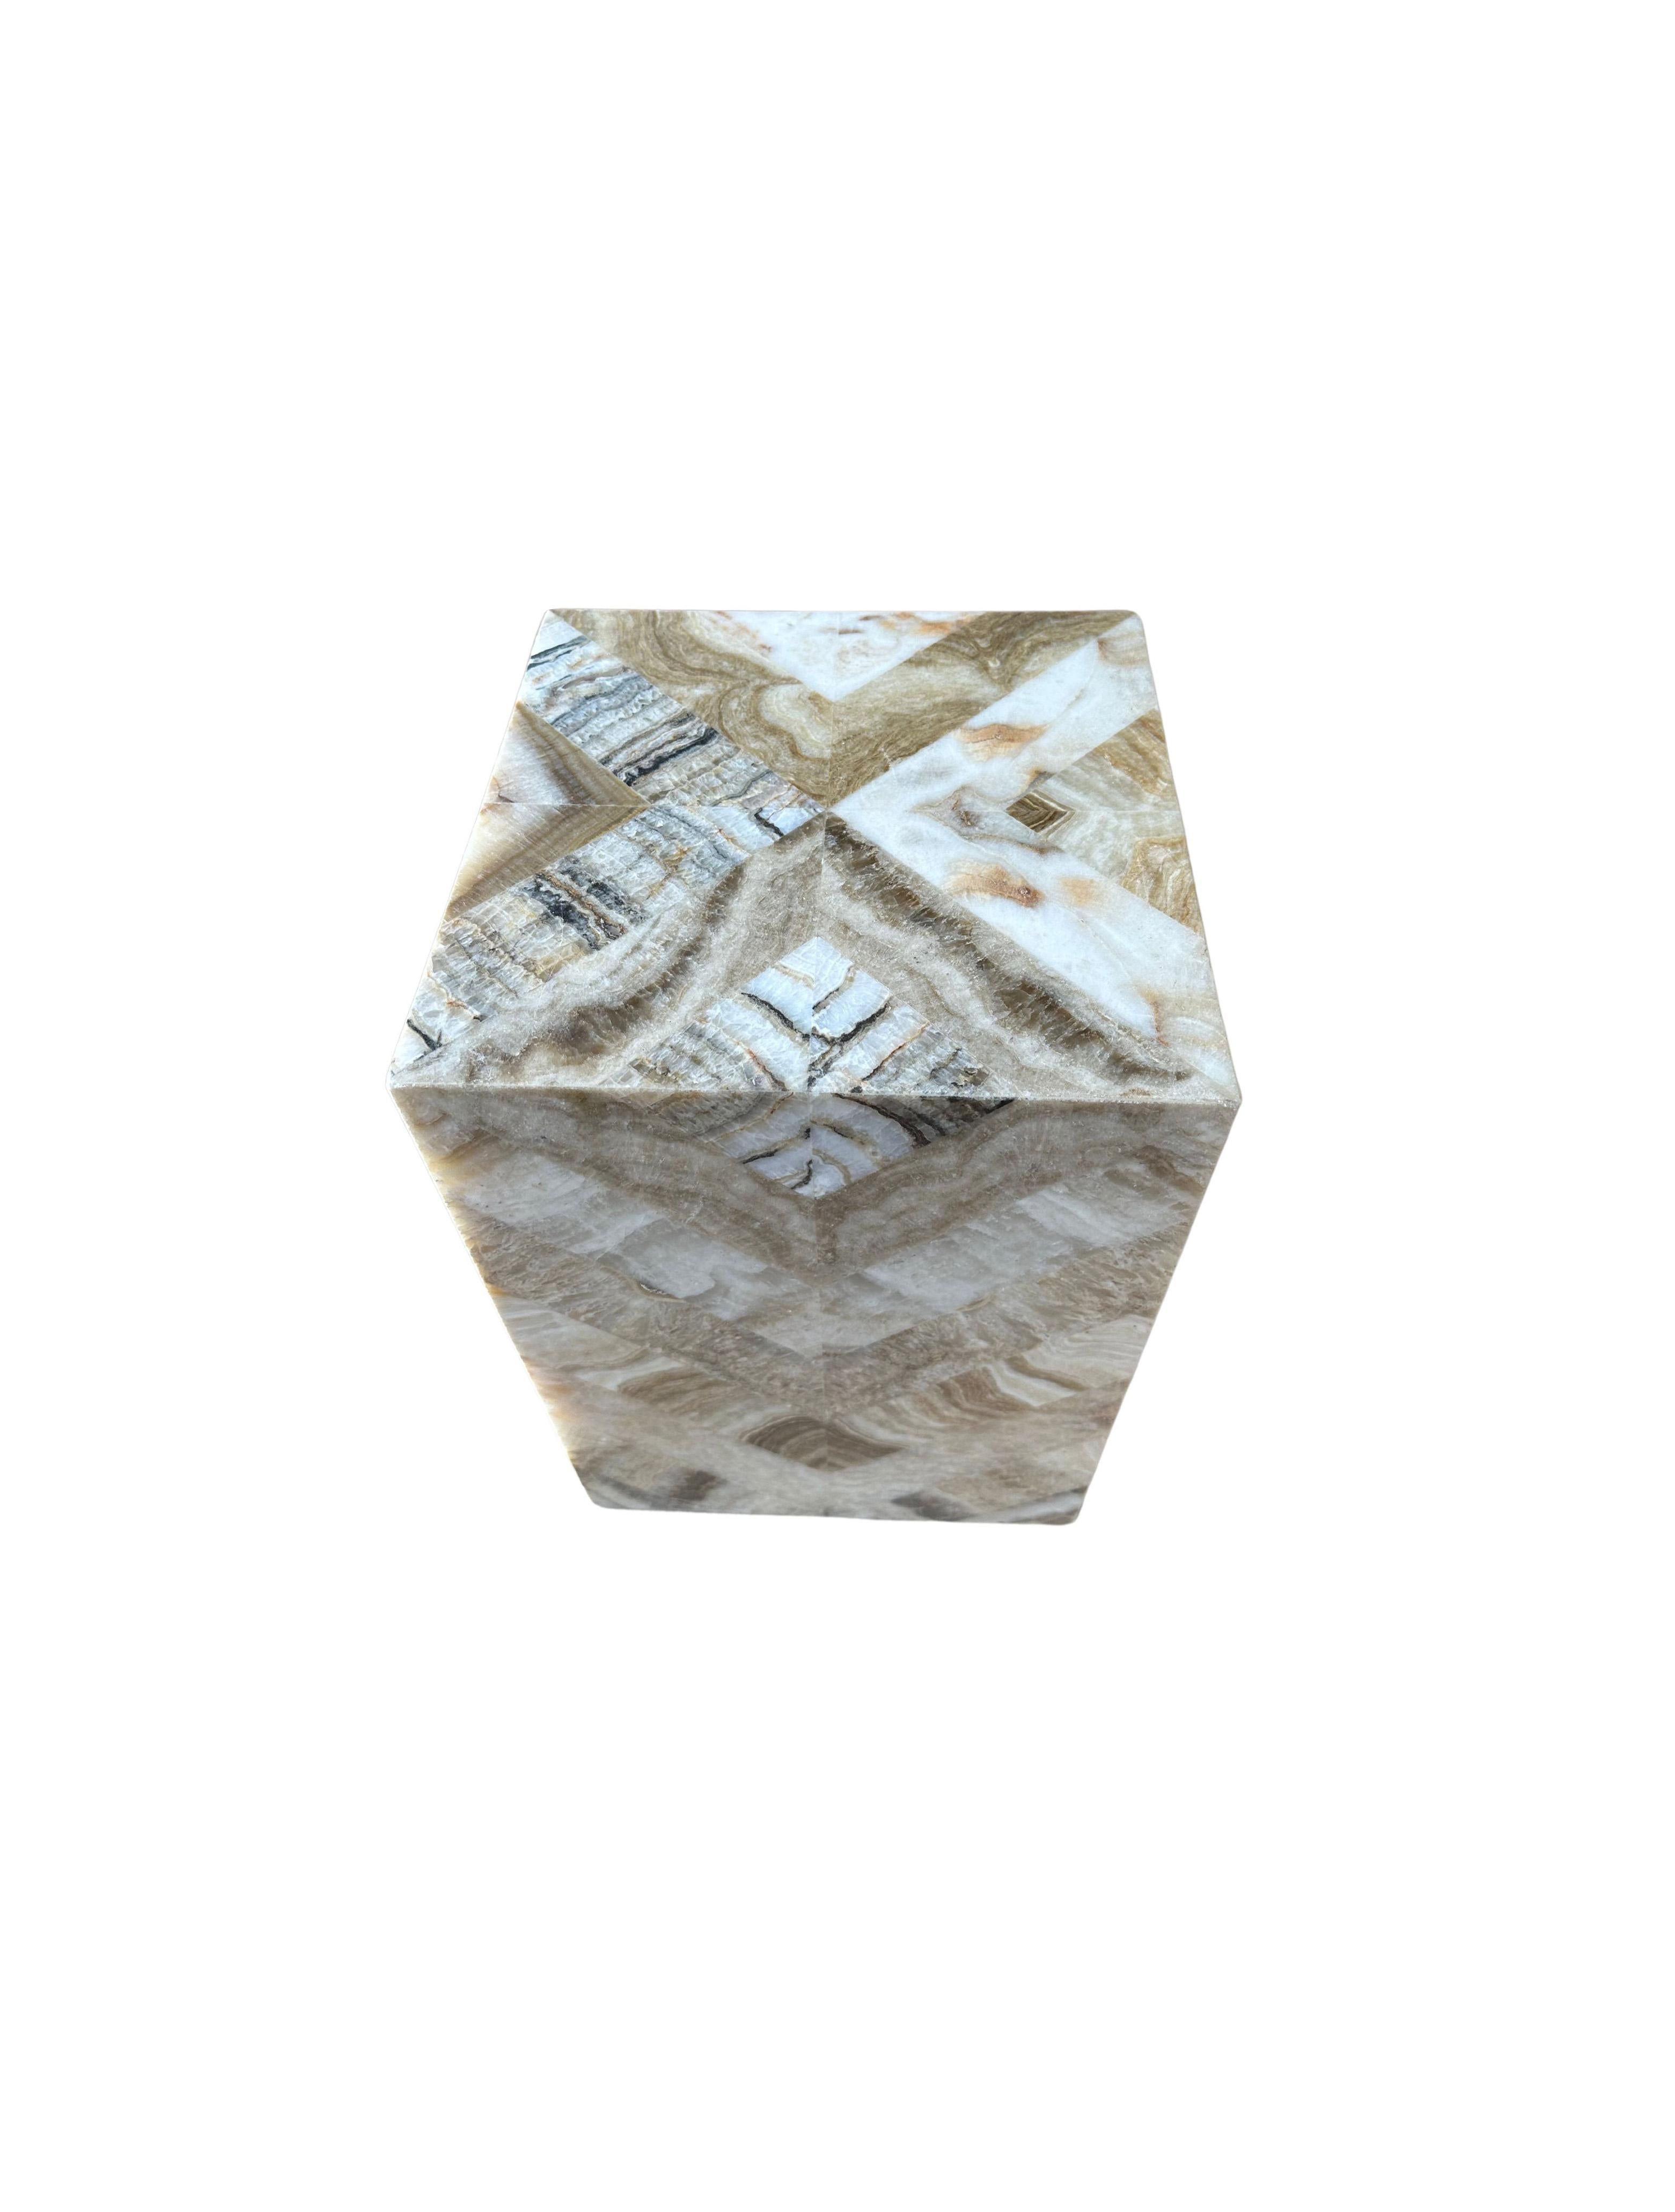 Herringbone Patterned Marble Side Table, Modern In Good Condition For Sale In Jimbaran, Bali